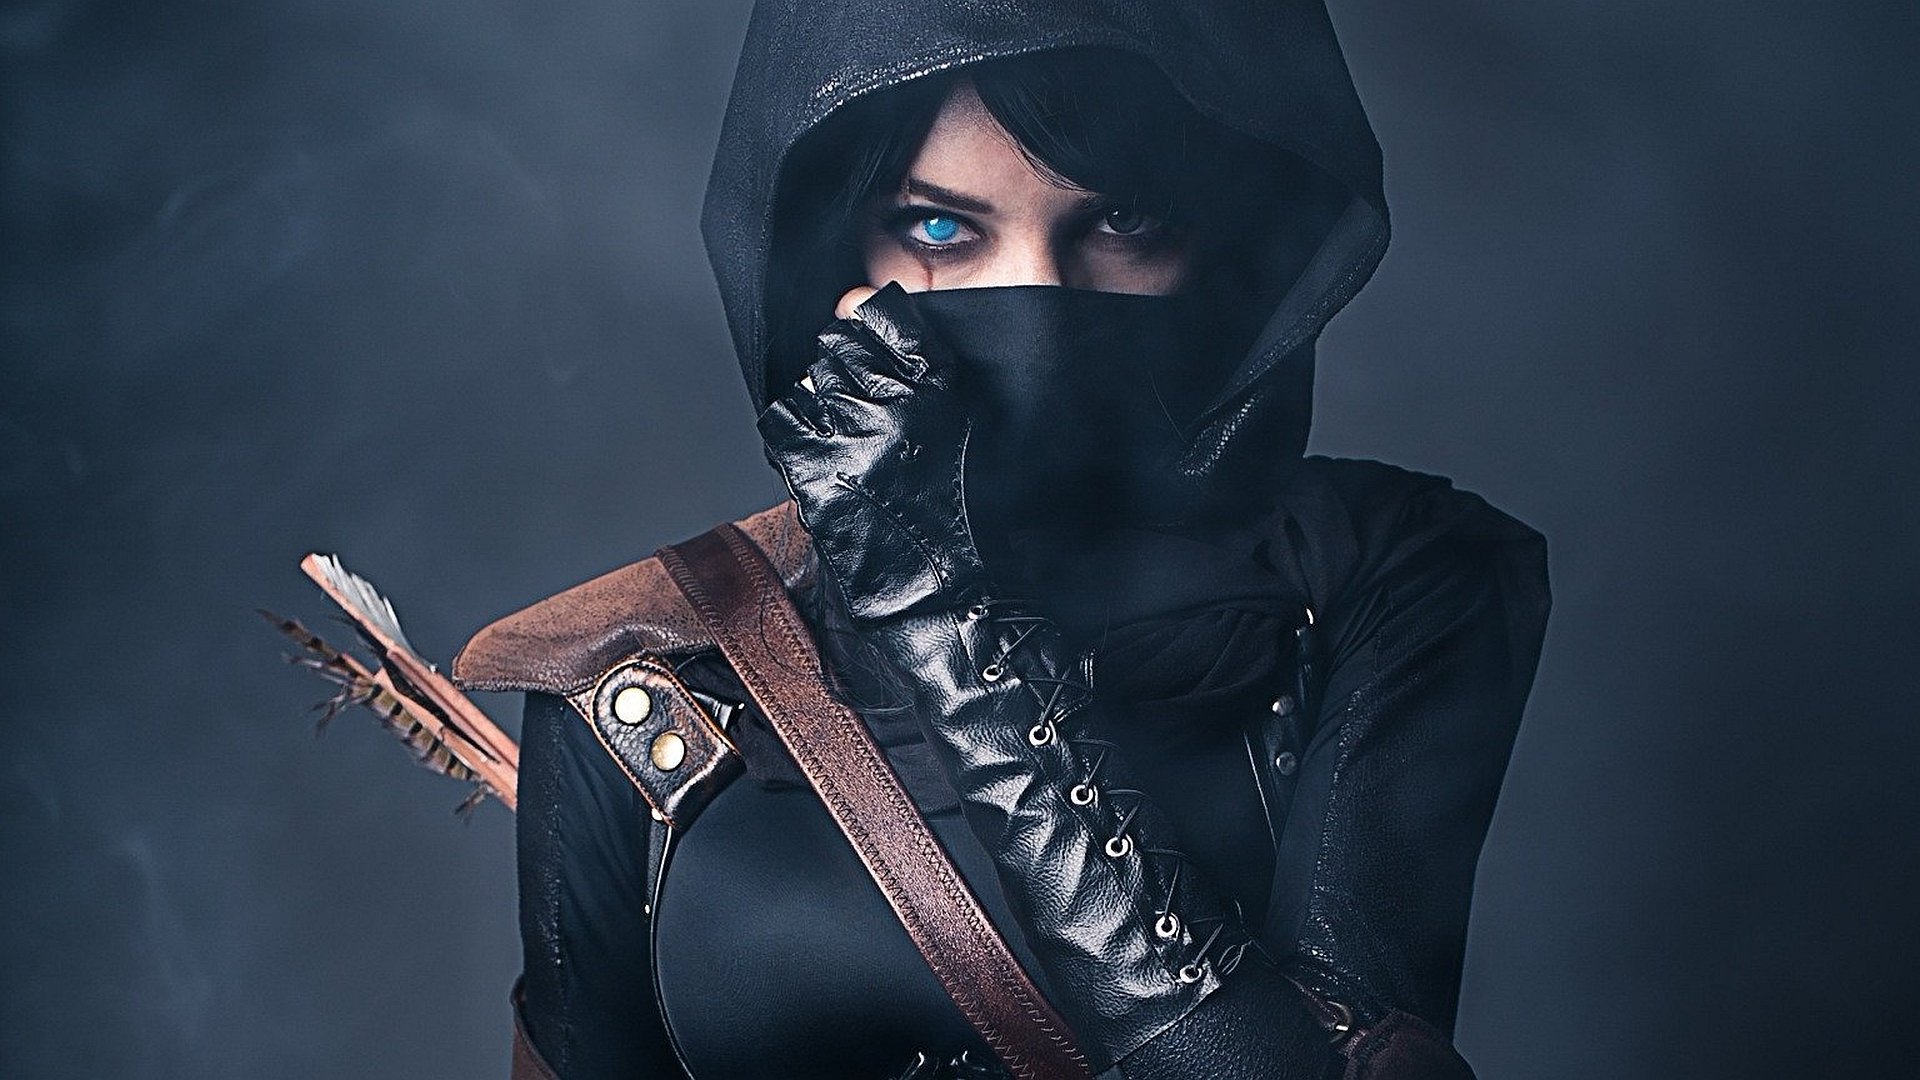 cosplay, Fantasy, Outfit, Beauty, Beautiful, Face, Cute, Attractive, Lovely, Woman, Female, Model Wallpaper